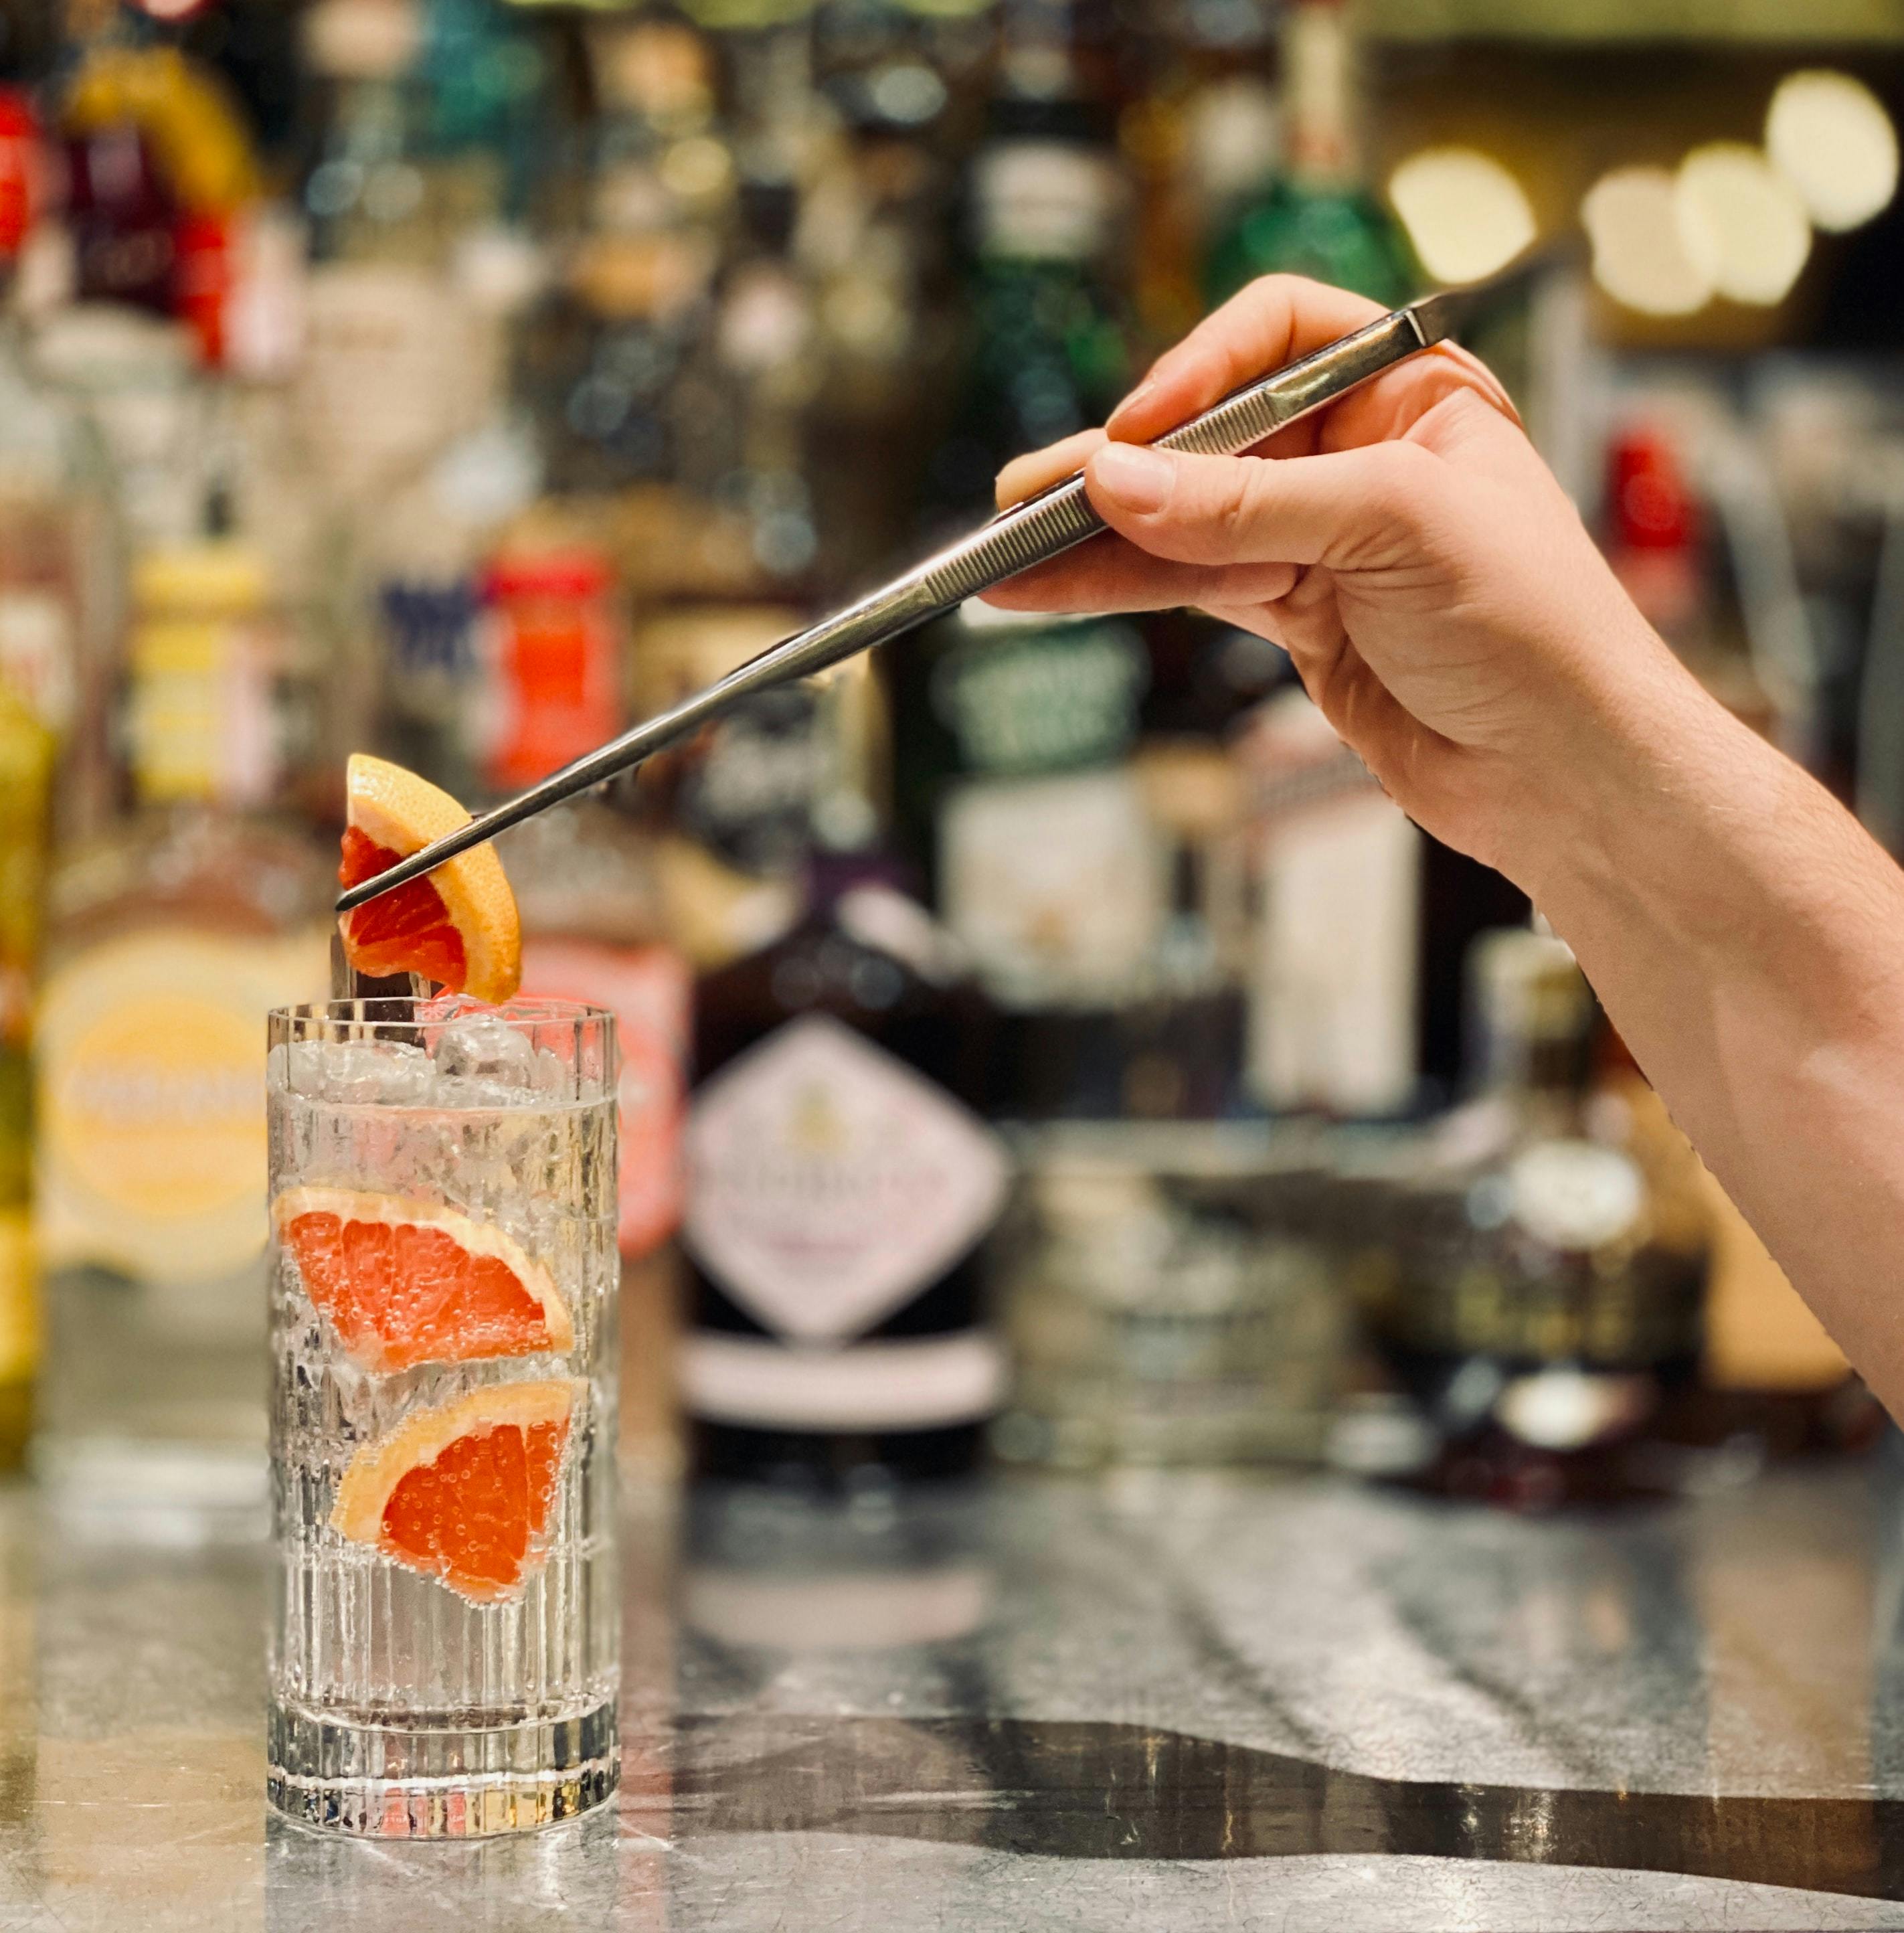 Start, manage and grow your gin sales business